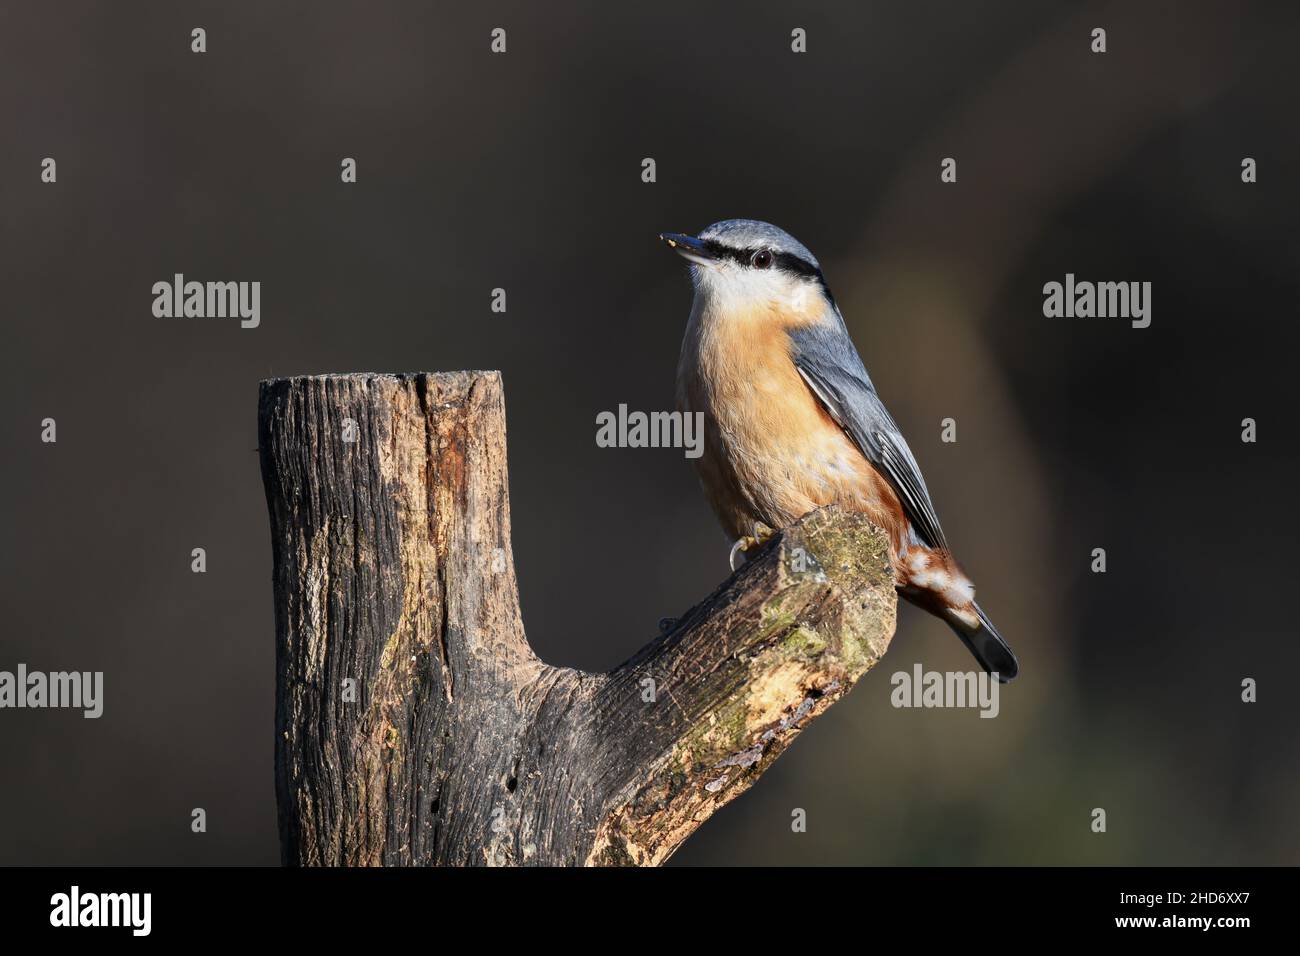 Close up portrait of a nuthatch, Sitta europaea, as it is perched in the sunshine on an old tree stump Stock Photo